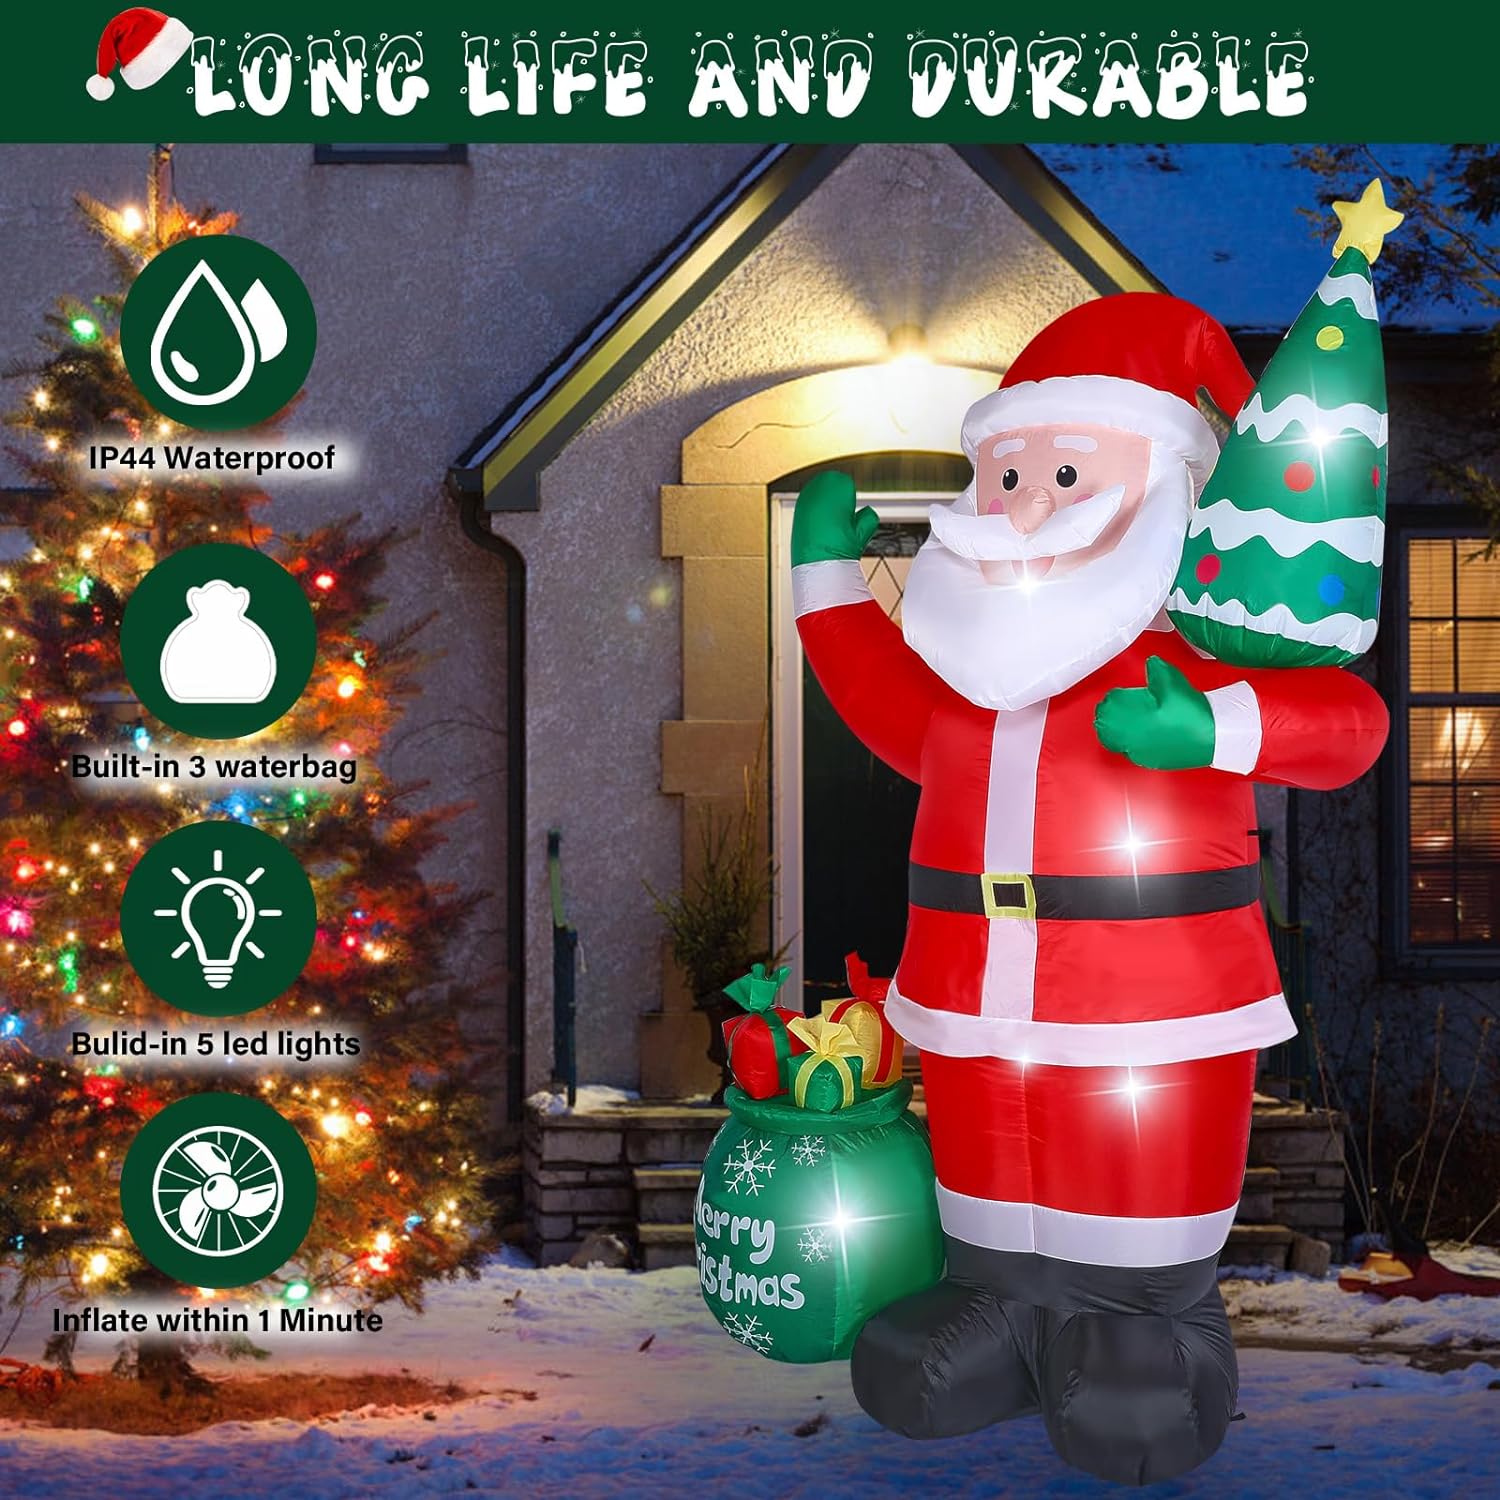 8 FT Christmas Inflatables Outdoor Decorations, Blow up Inflatable Santa Claus with LED Lights Gift Bag Christmas Tree for Xmas Decor Indoor Outside Yard Garden Patio Lawn Home Holiday Party